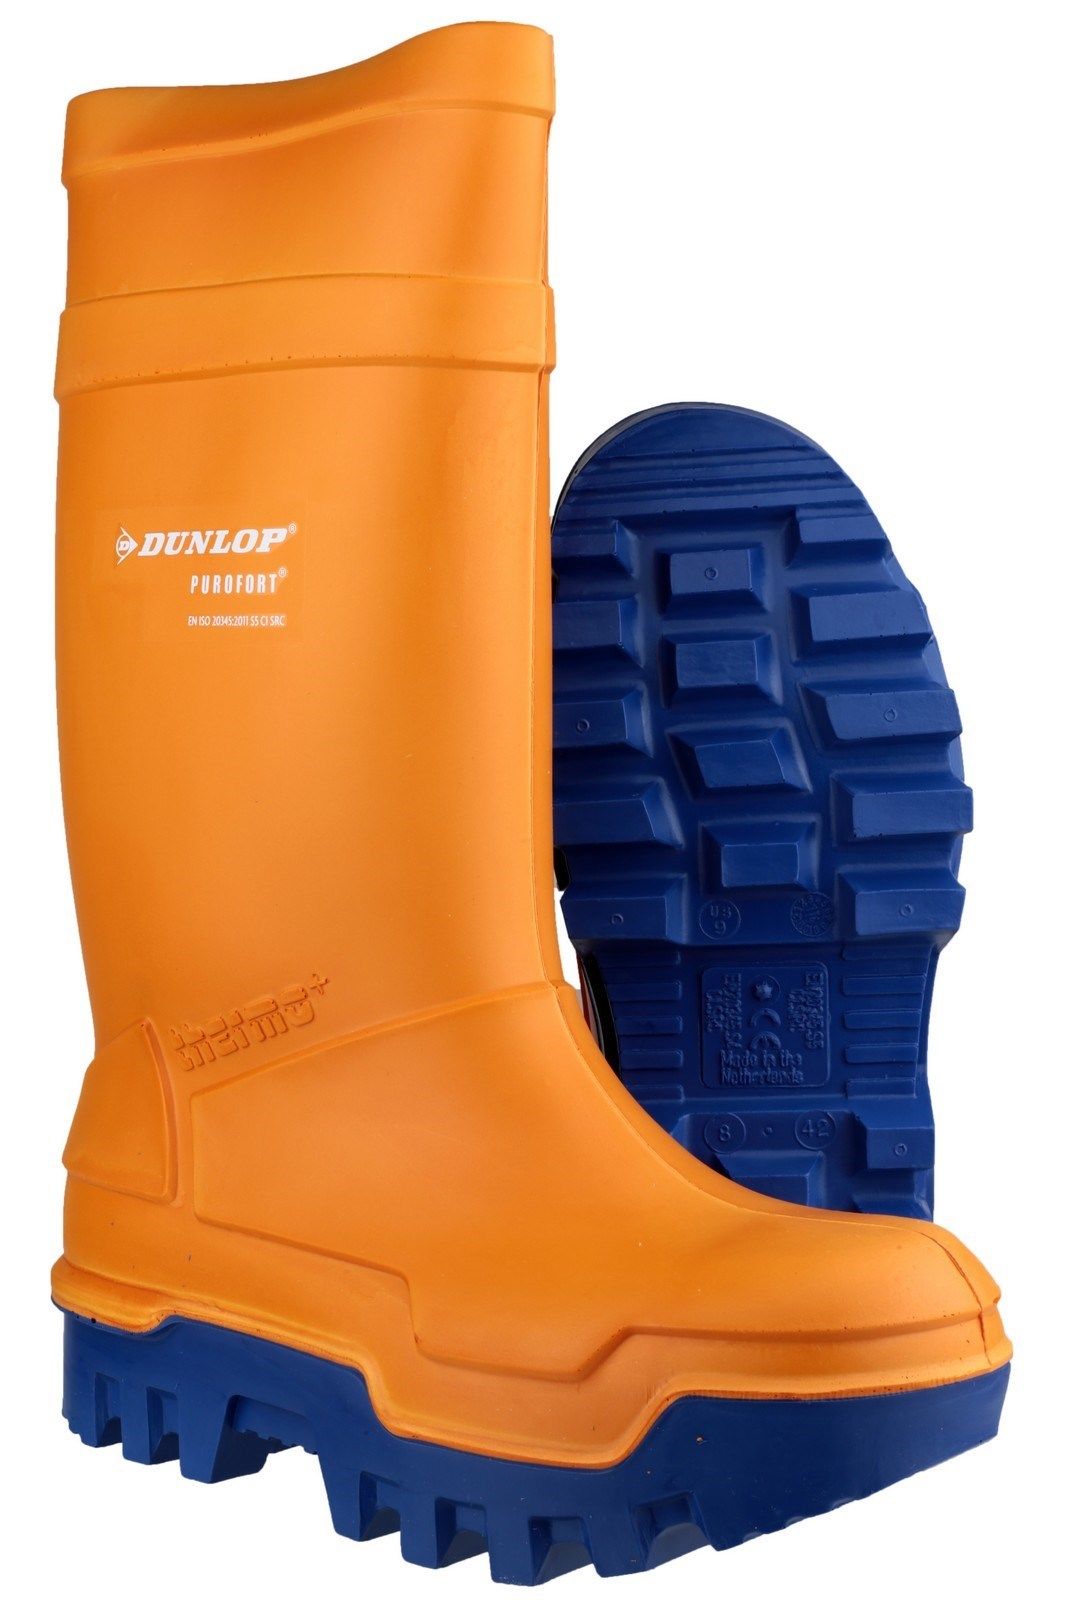 Dunlop C661343 Purofort Thermo+ Safety Wellington -40C Cold Insulated Steel Toe Cap Antistatic S4 Size UK8